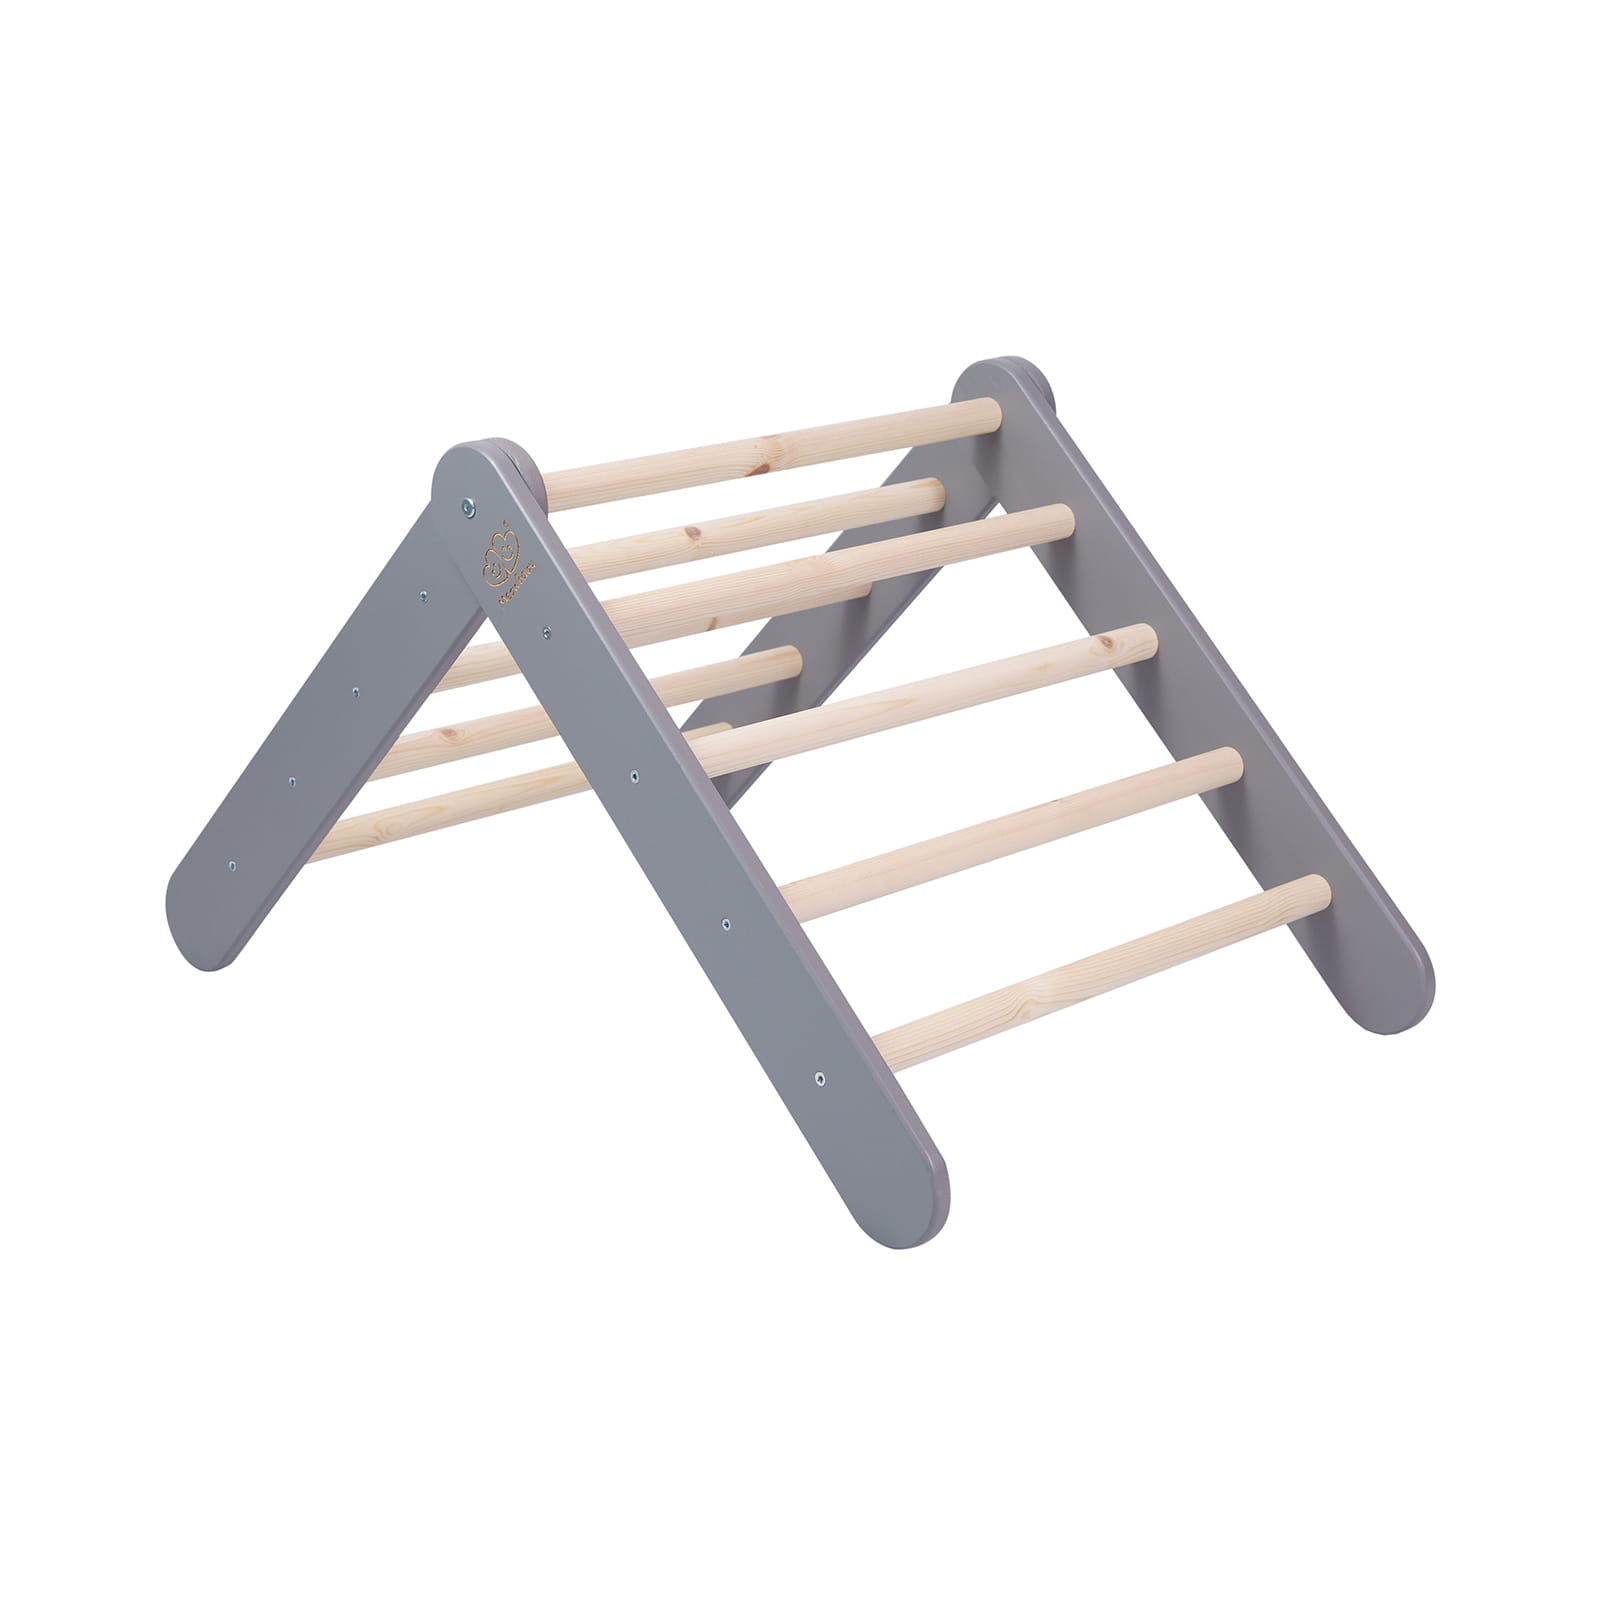 Meow, climbing triangle for the children's room, grey/natural 